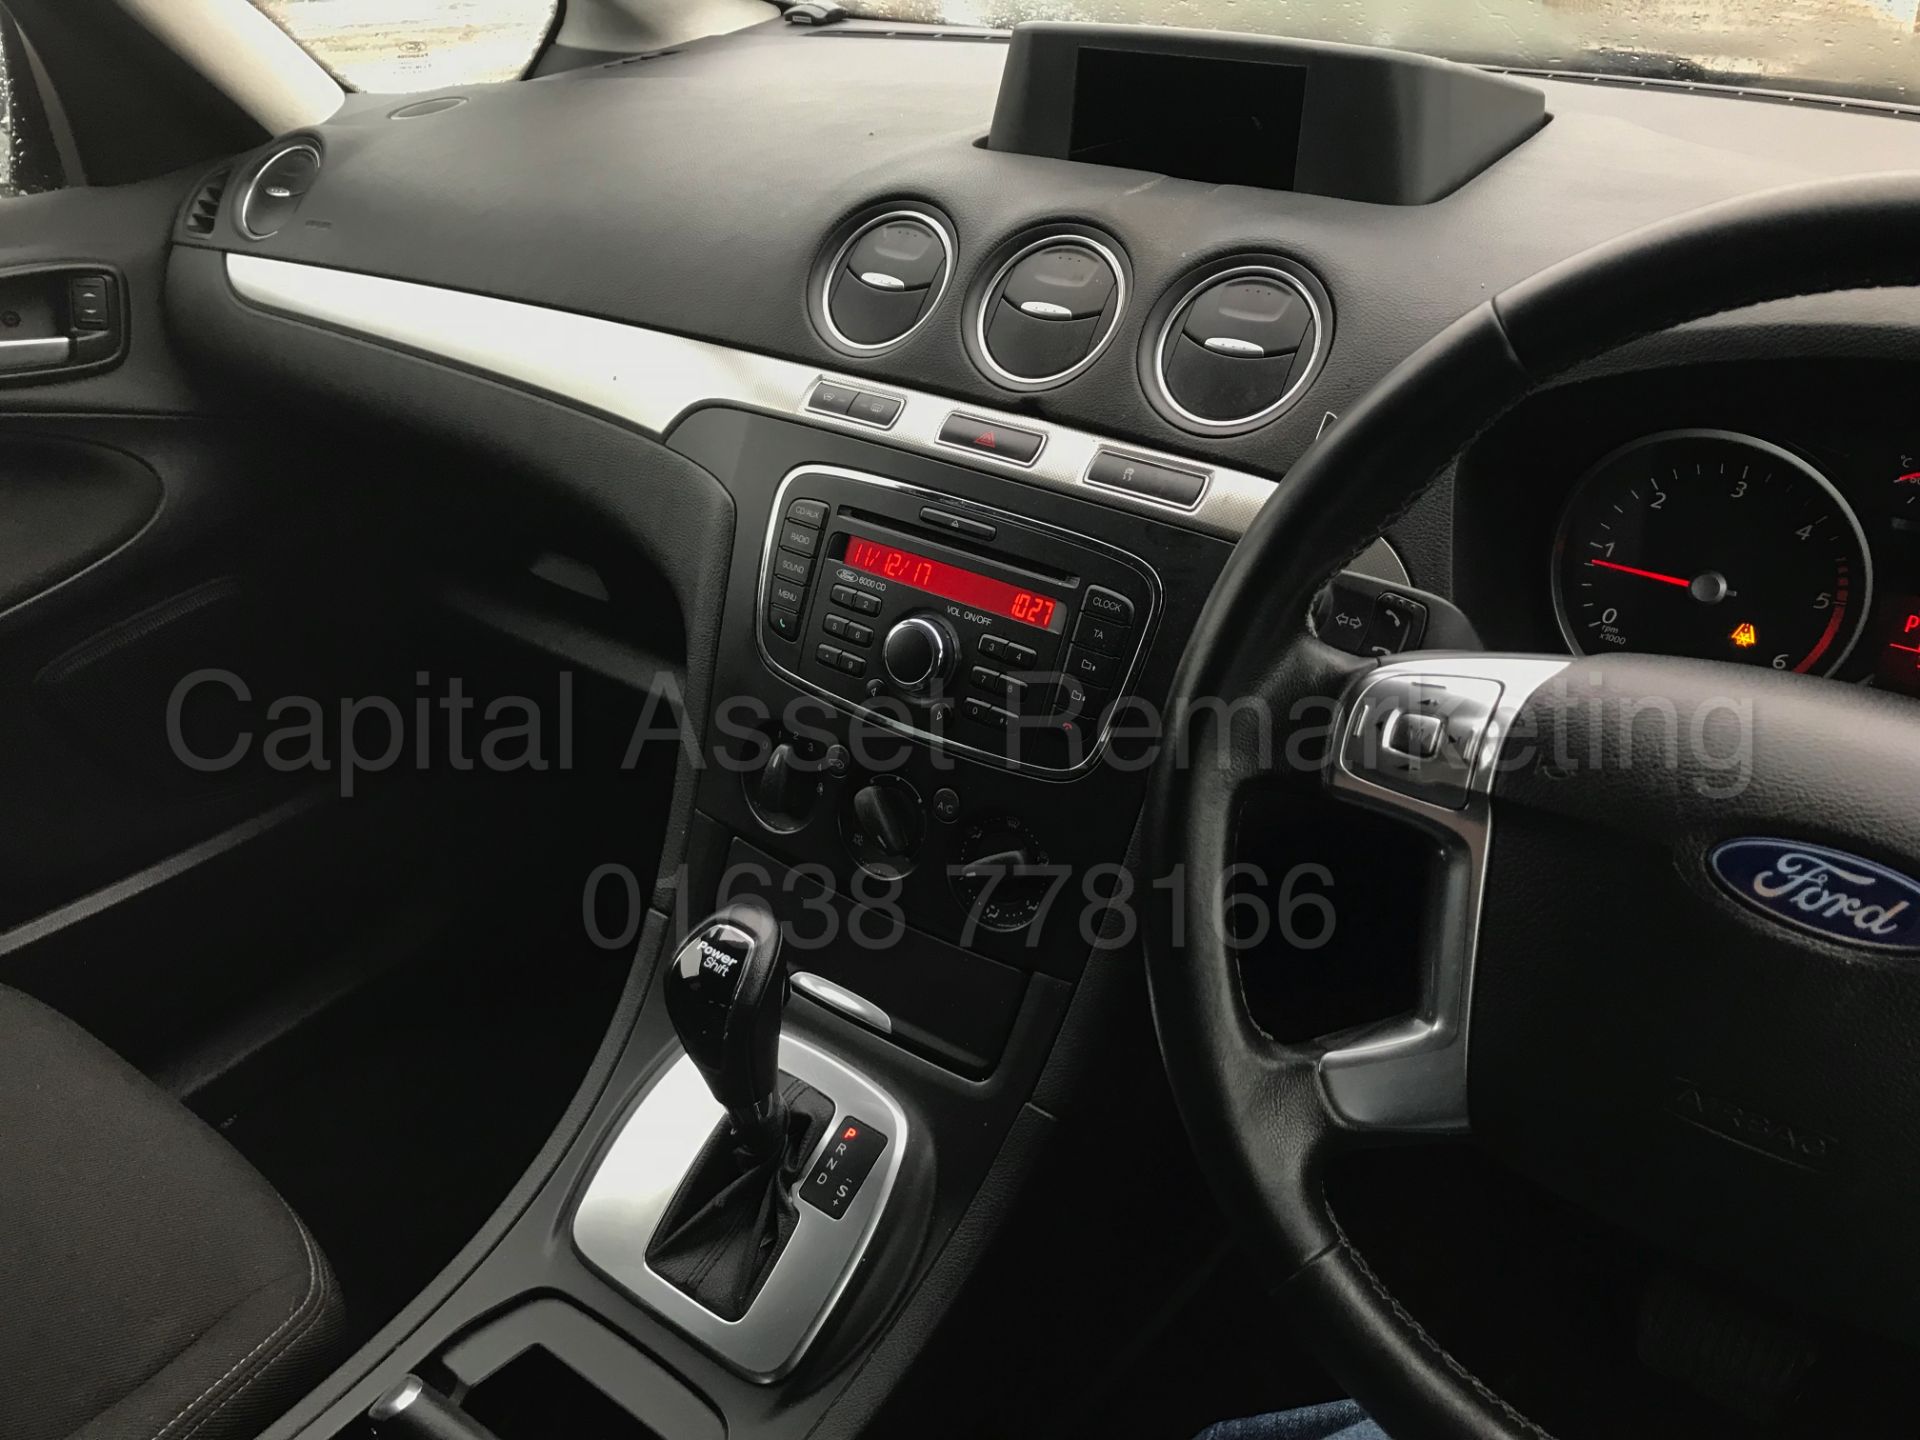 (On Sale) FORD GALAXY 'ZETEC' 7 SEATER (2014 - 14 REG) 2.0 TDCI - 140 BHP - POWER SHIFT (1 OWNER) - Image 23 of 30